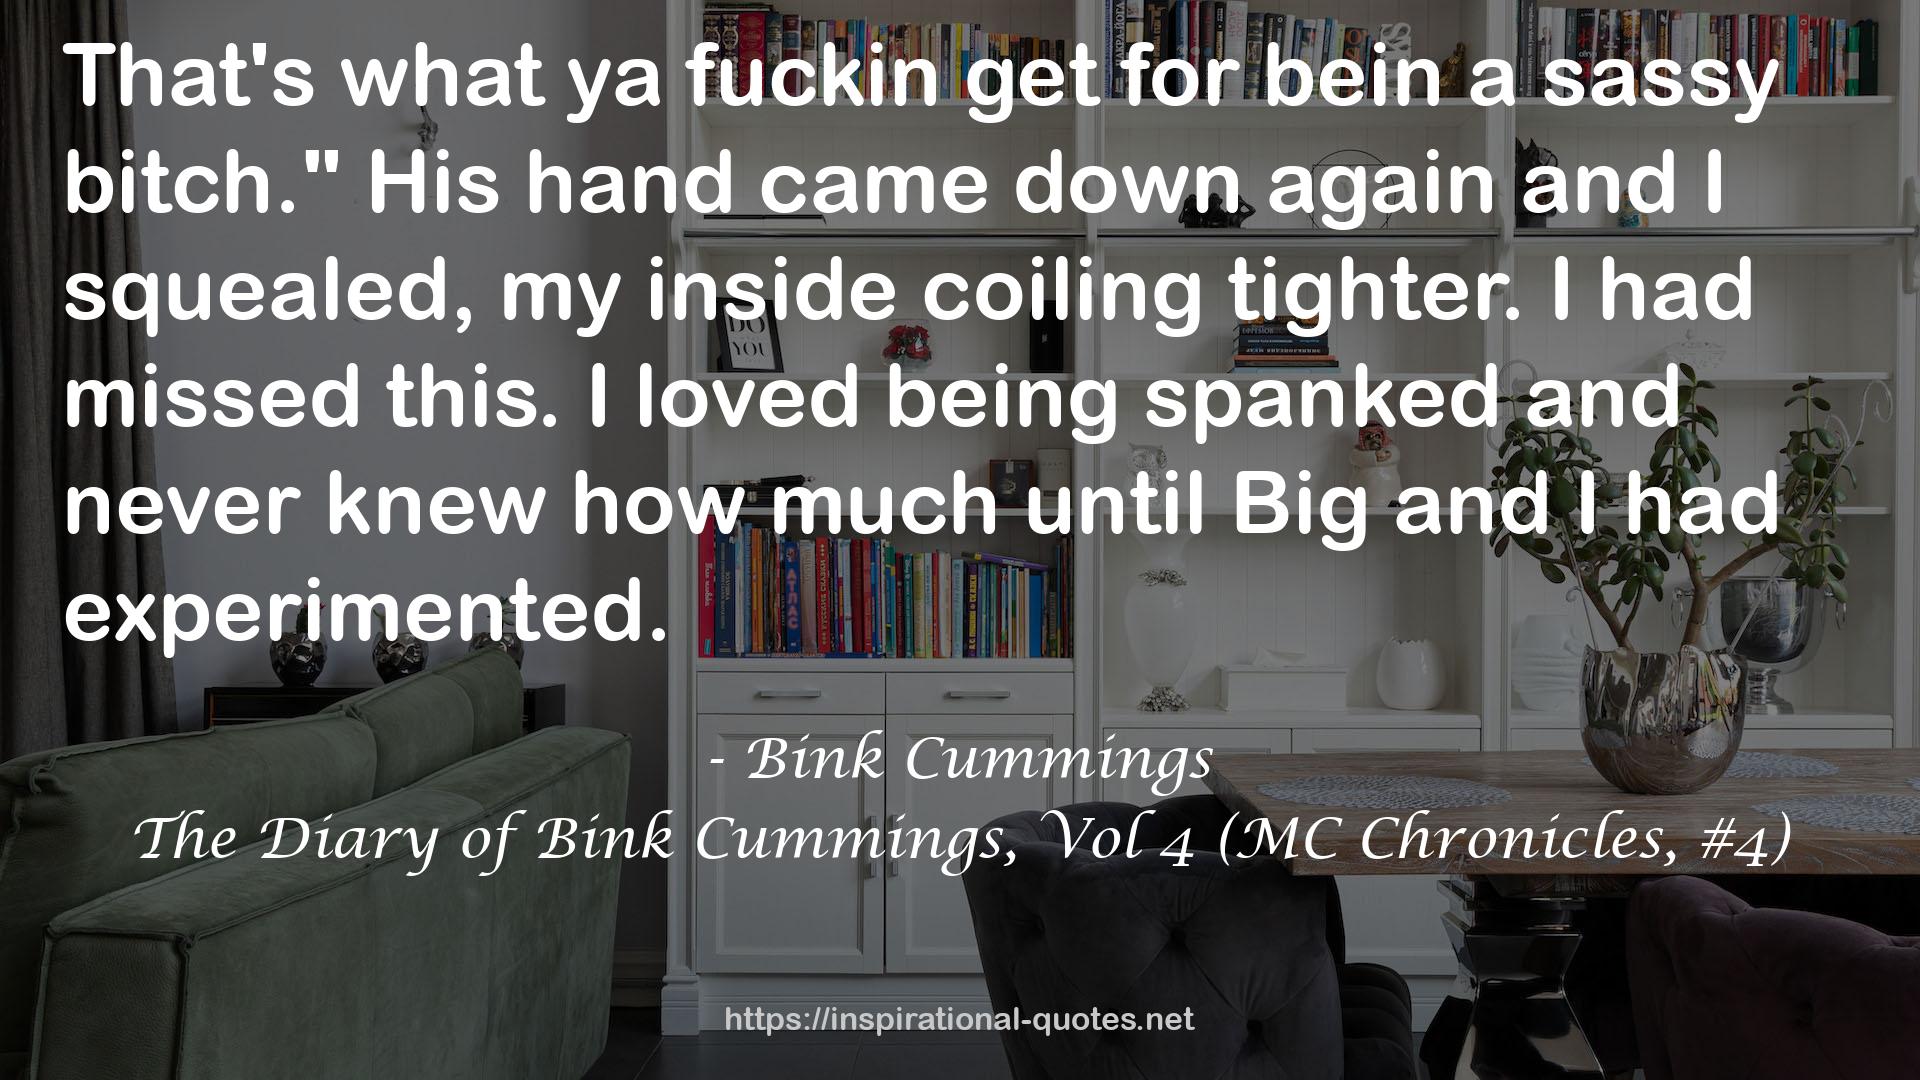 The Diary of Bink Cummings, Vol 4 (MC Chronicles, #4) QUOTES